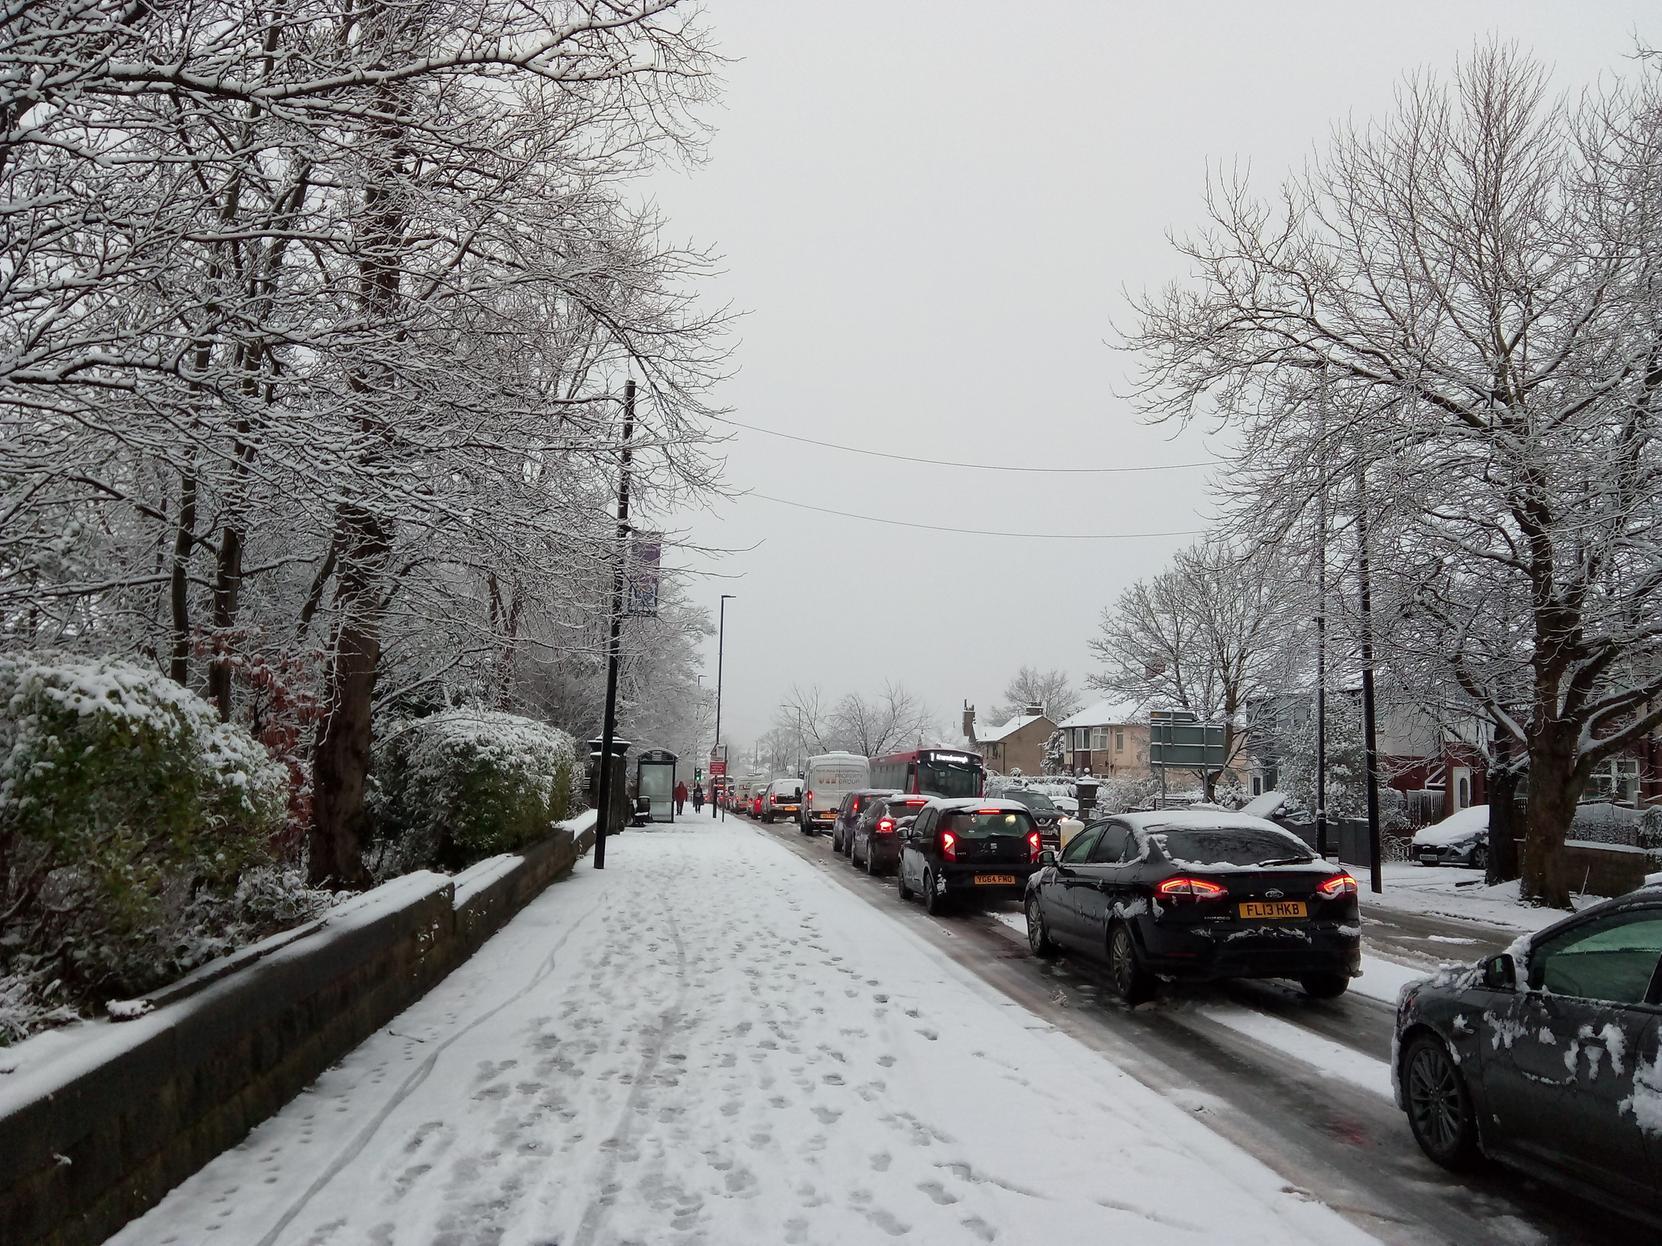 Vehicles queuing in the snow this morning along Knaresborough Road.